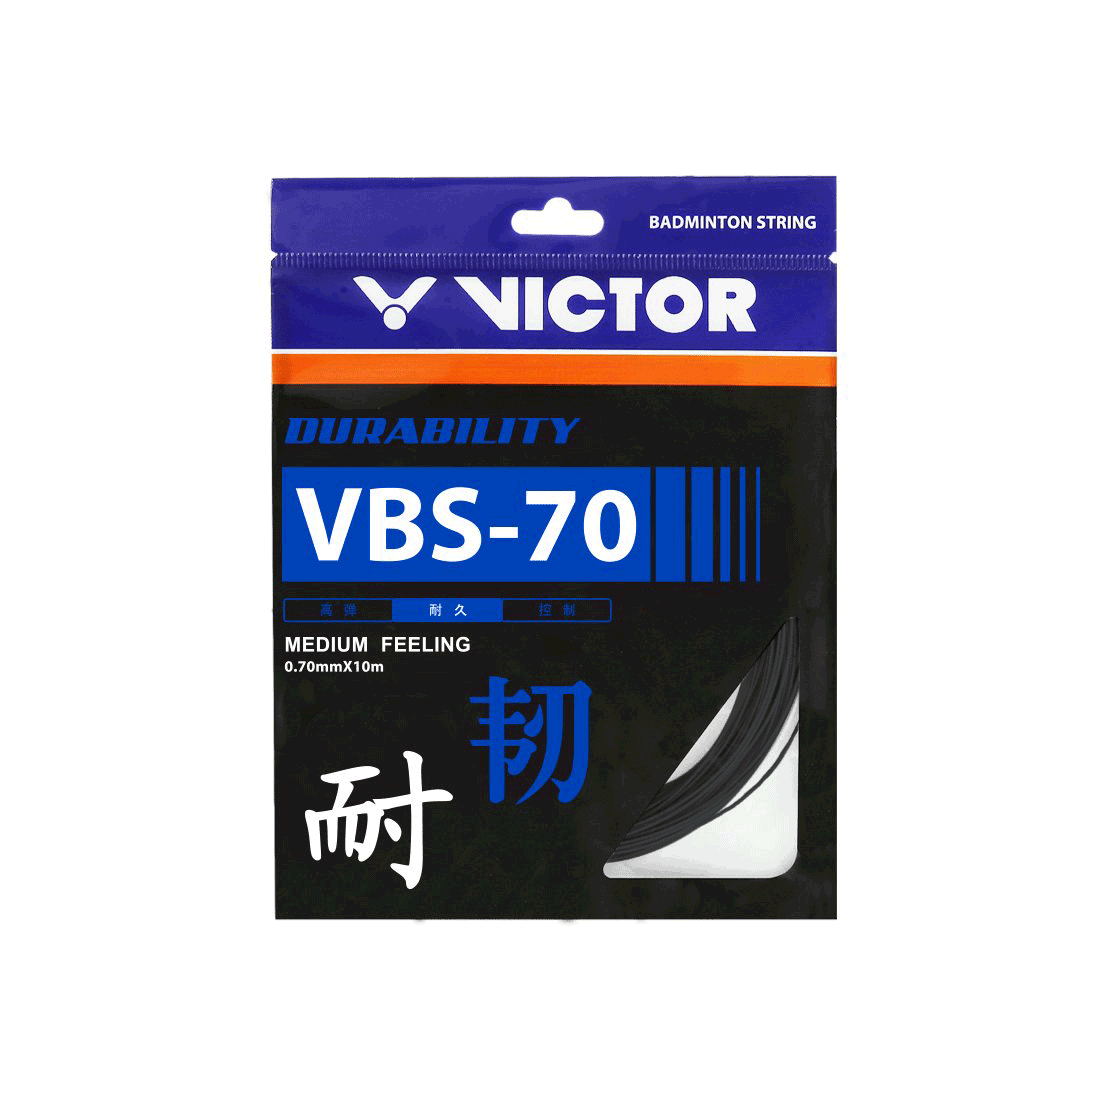 VBS-70 High Resilience Badminton String